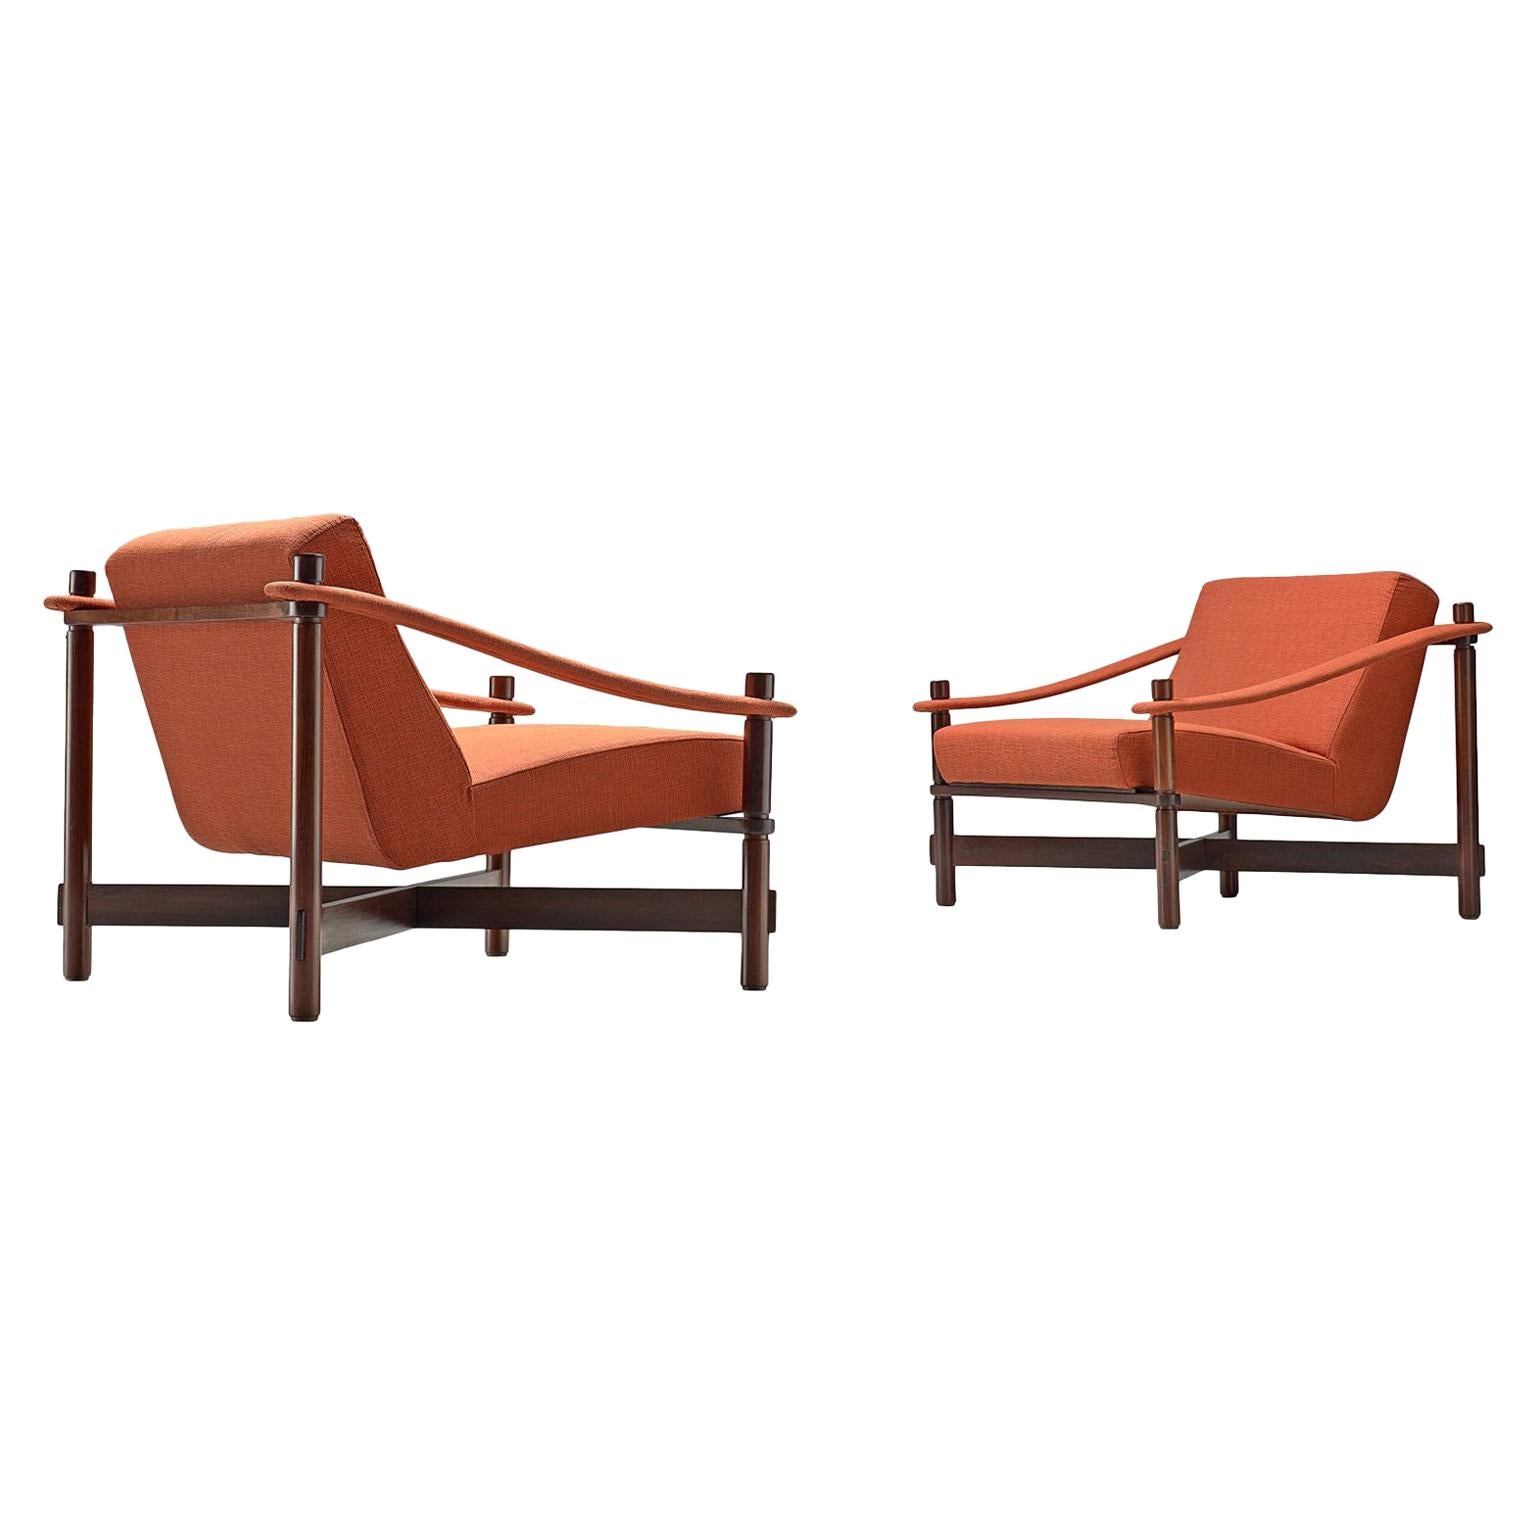 Listing for II: Rafaella Crespi Set of Two Lounge Chairs and 8 Pamplona chairs